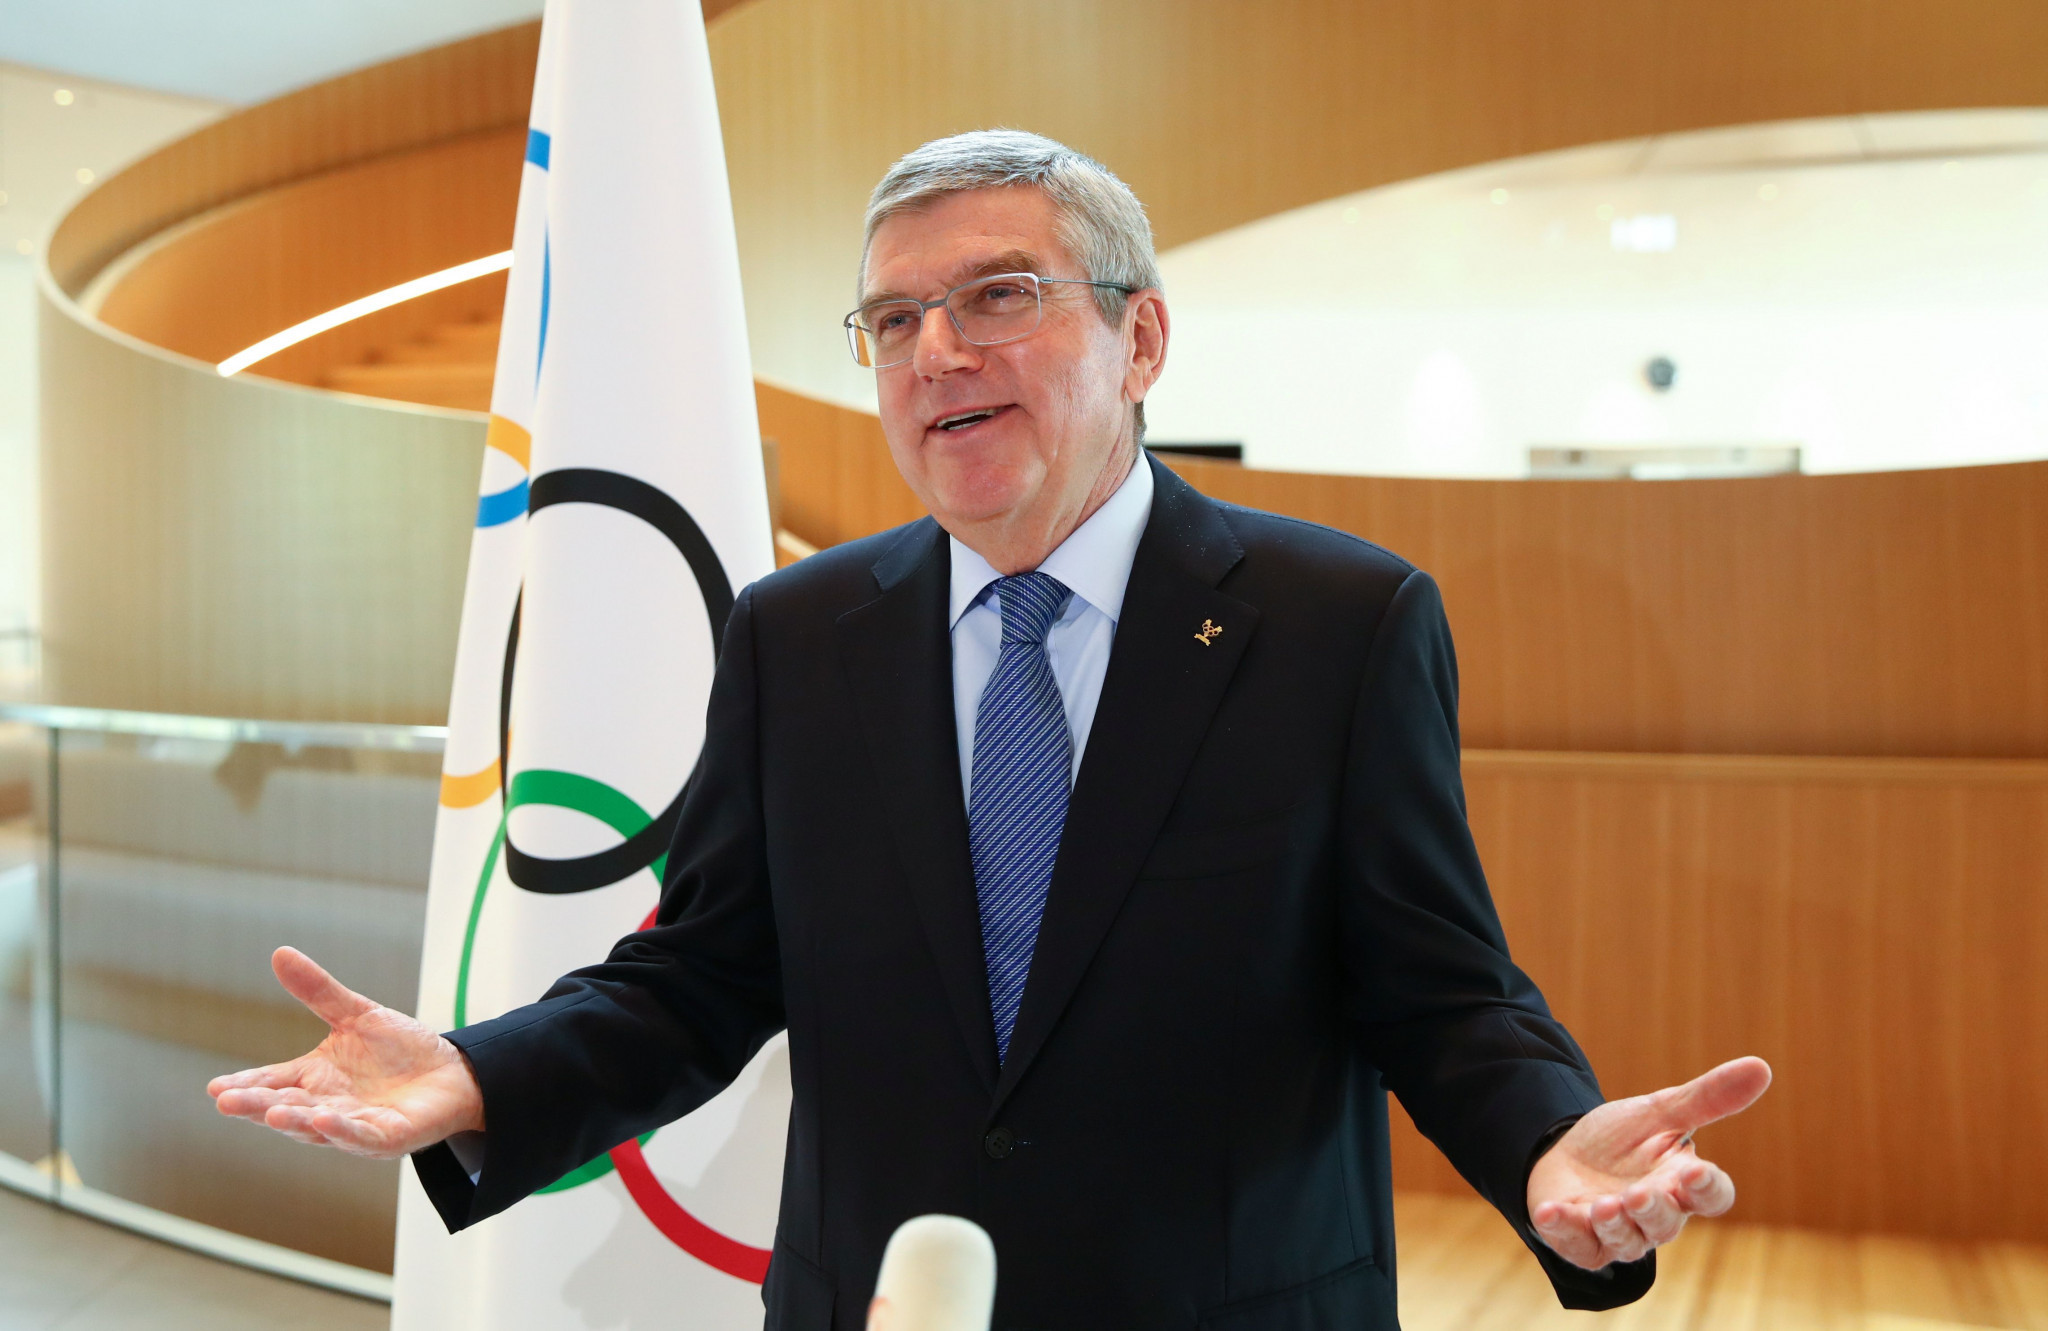 Thomas Bach faces his most challenging period as IOC President ©Getty Images